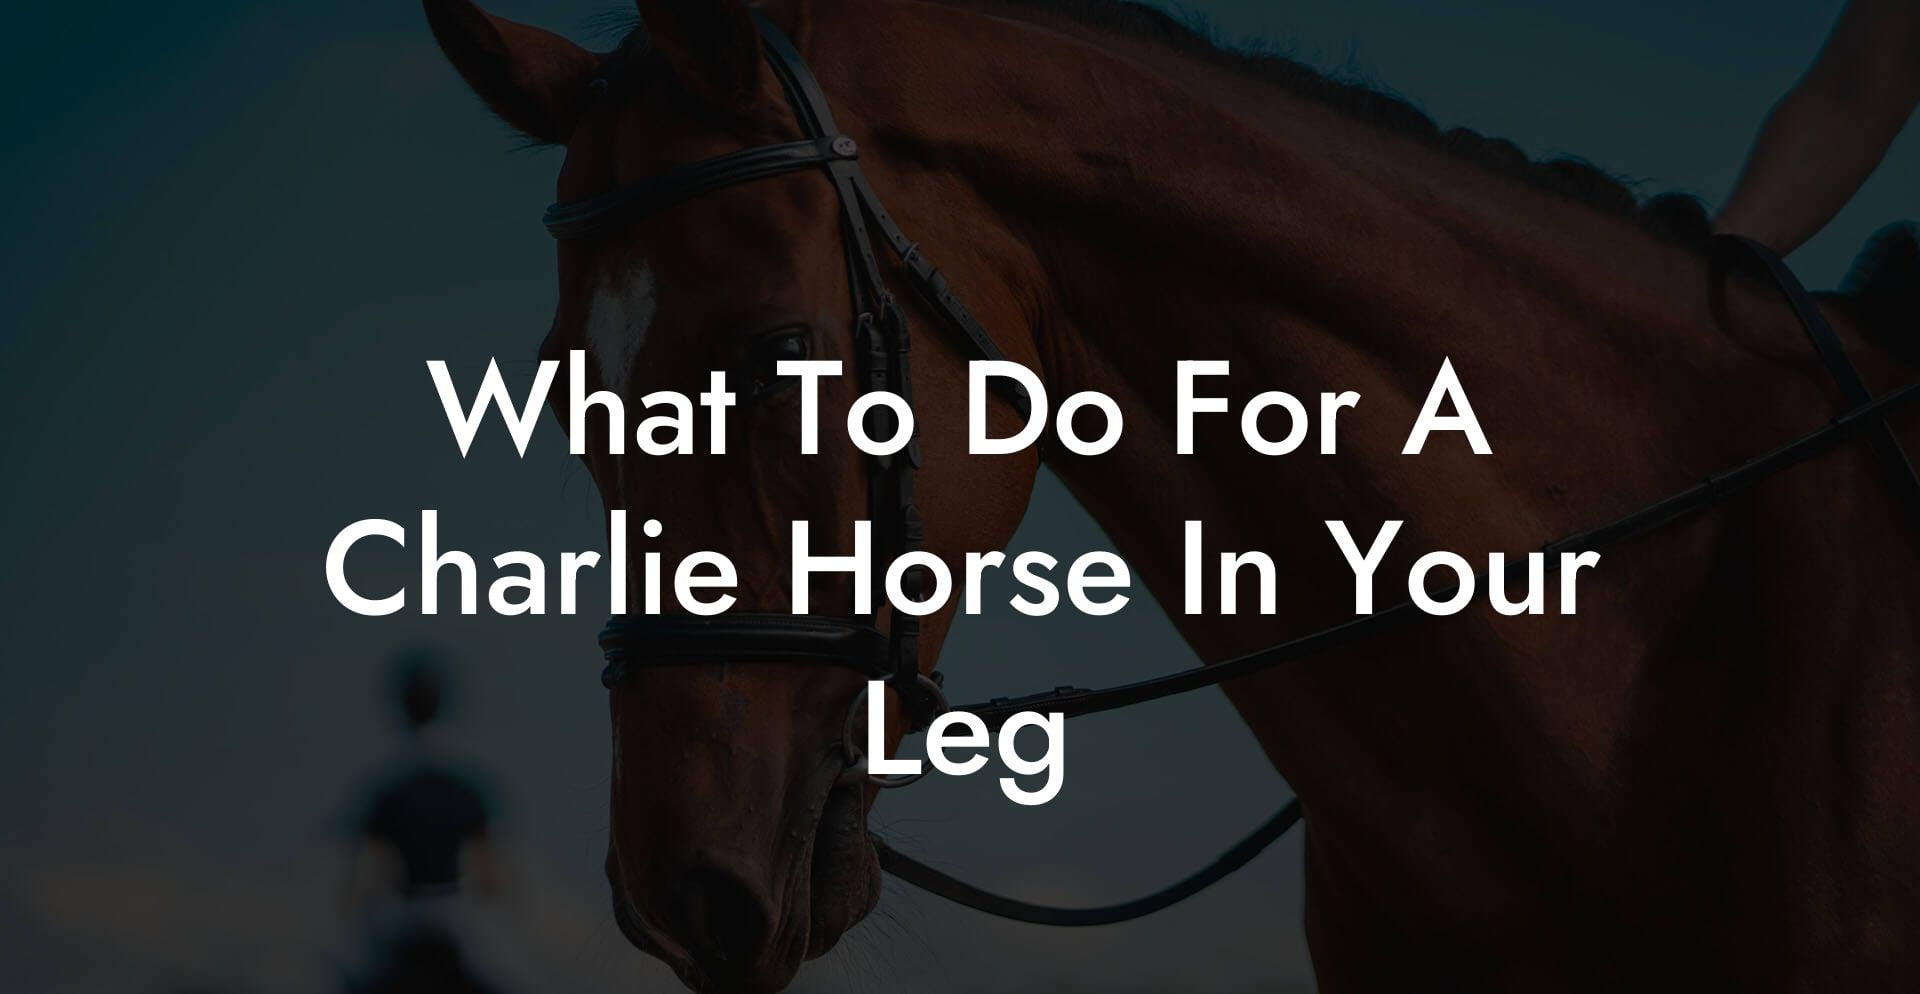 What To Do For A Charlie Horse In Your Leg